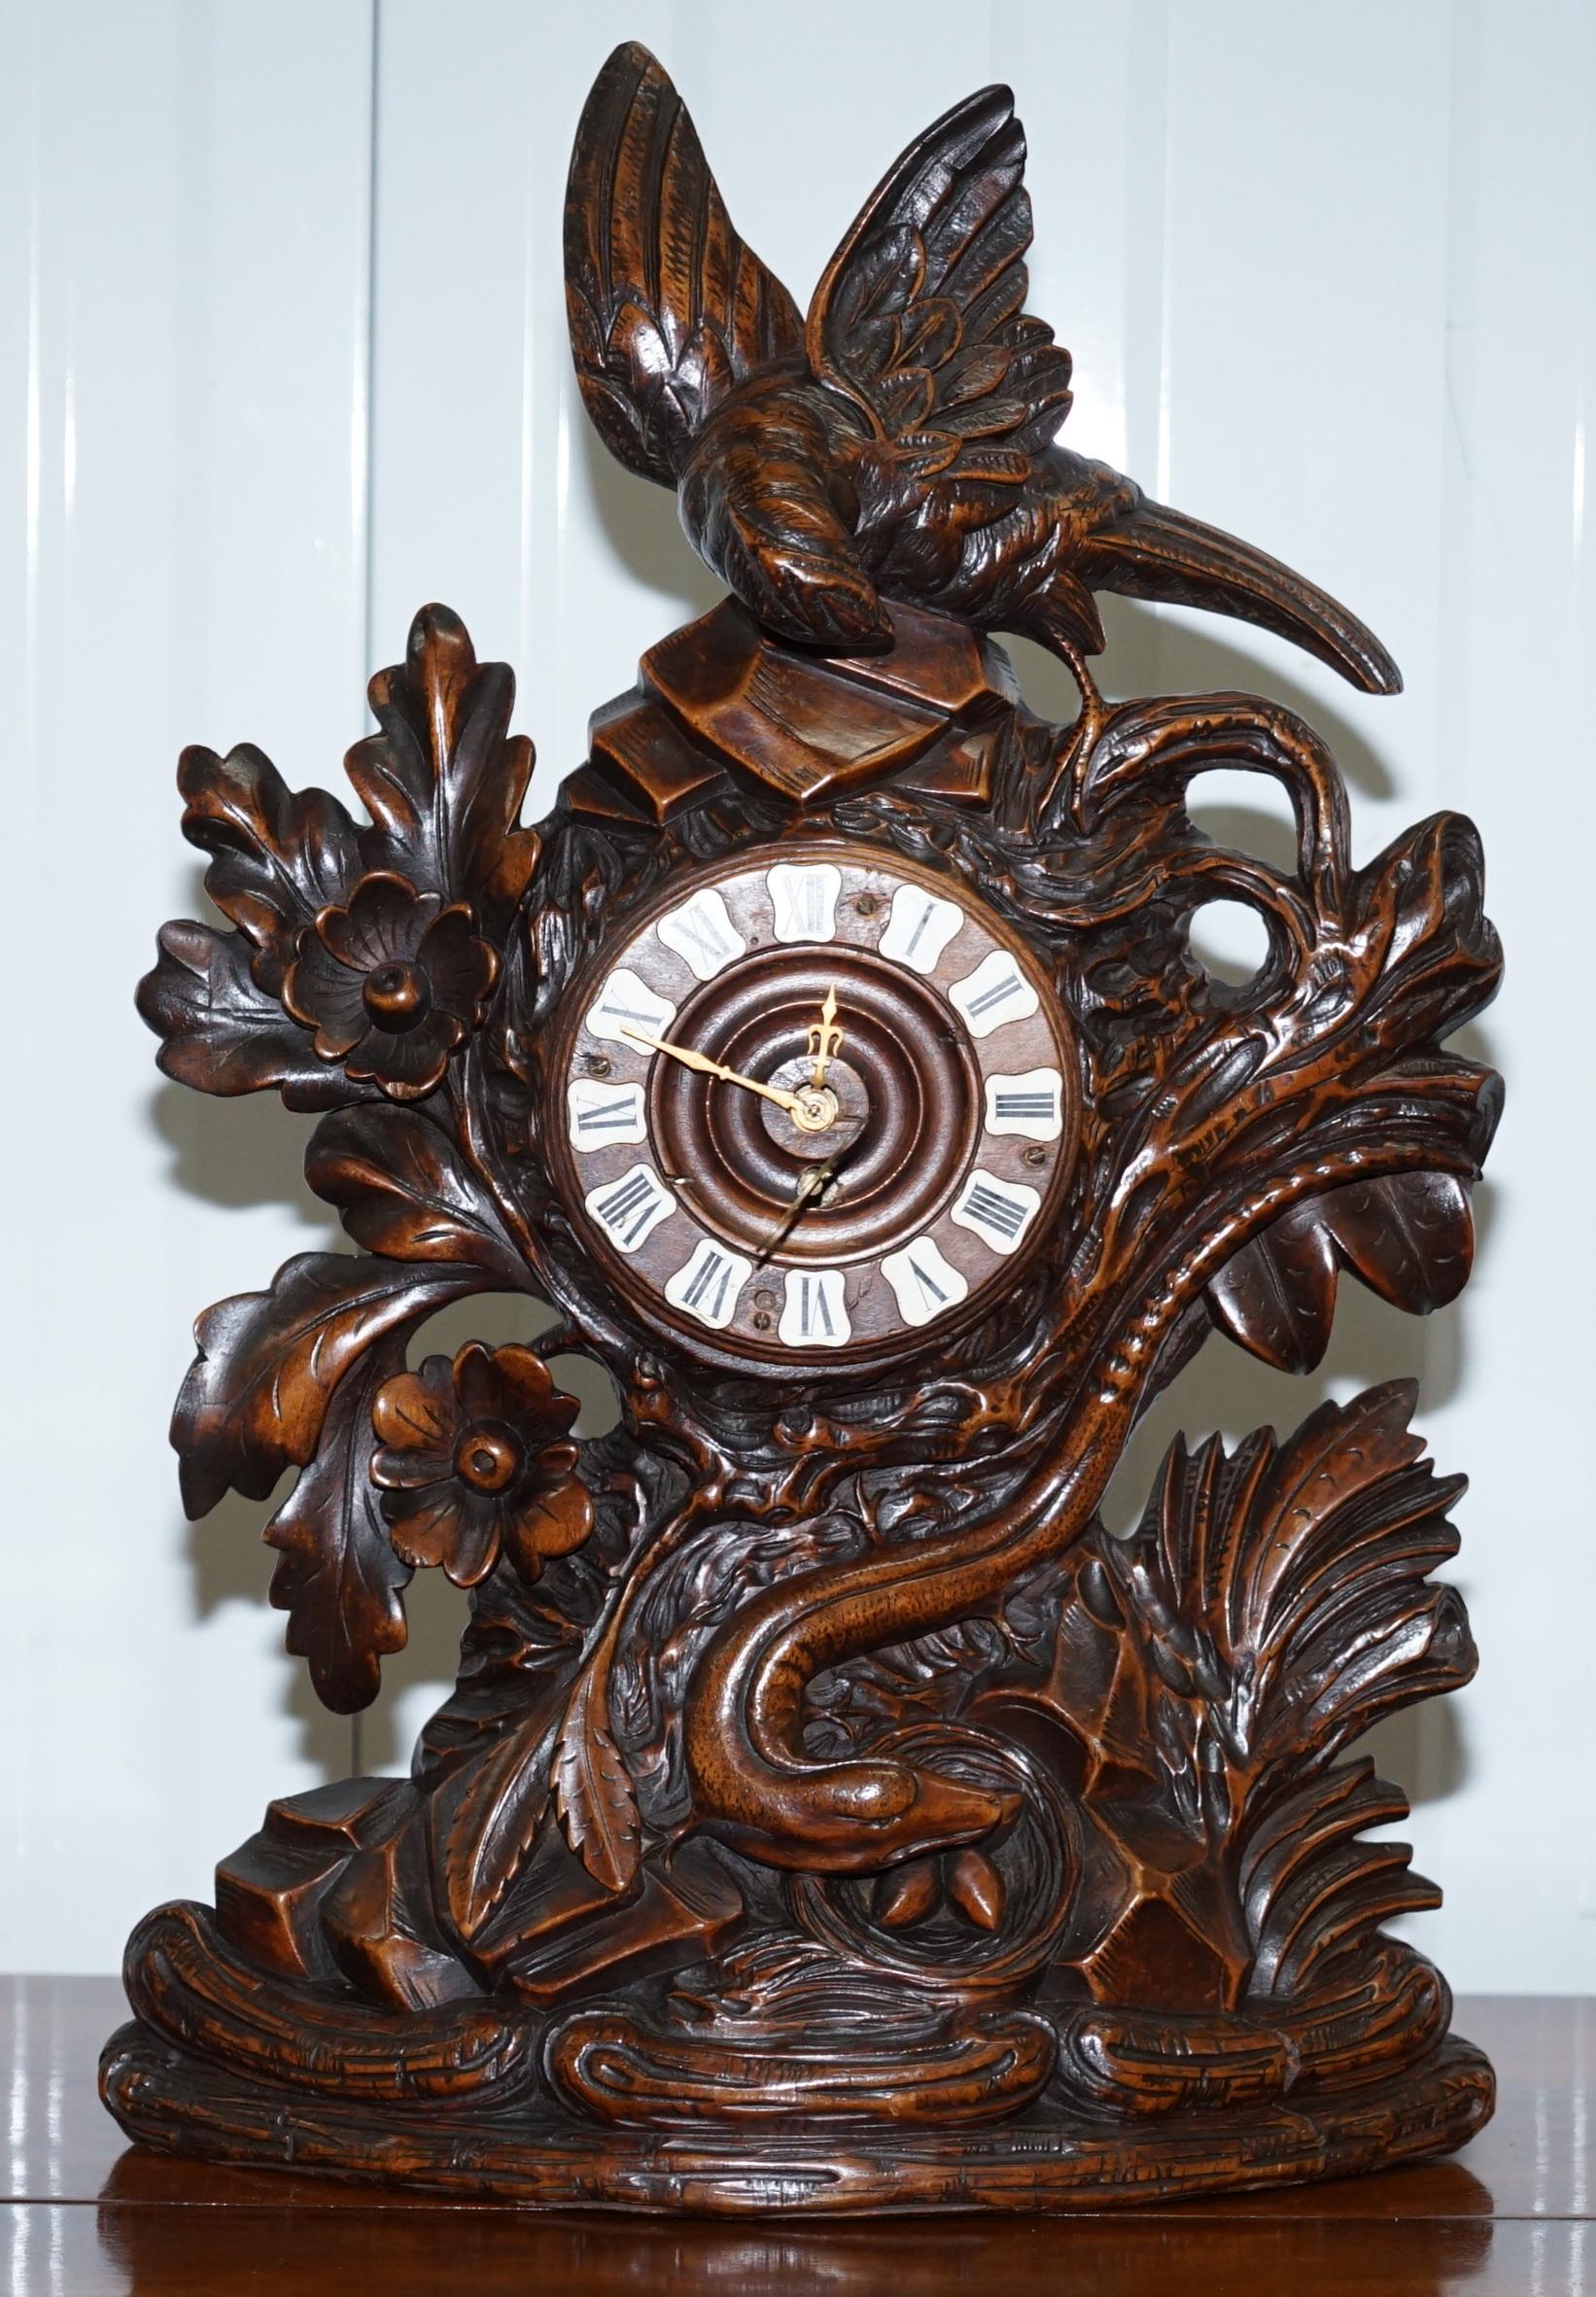 We are delighted to offer for salethis lovely original late 19th century Black Forest Linden wood clock garniture set with original candles

Its very rare to find sets with the candlestick holders still present, it’s even rarer for those